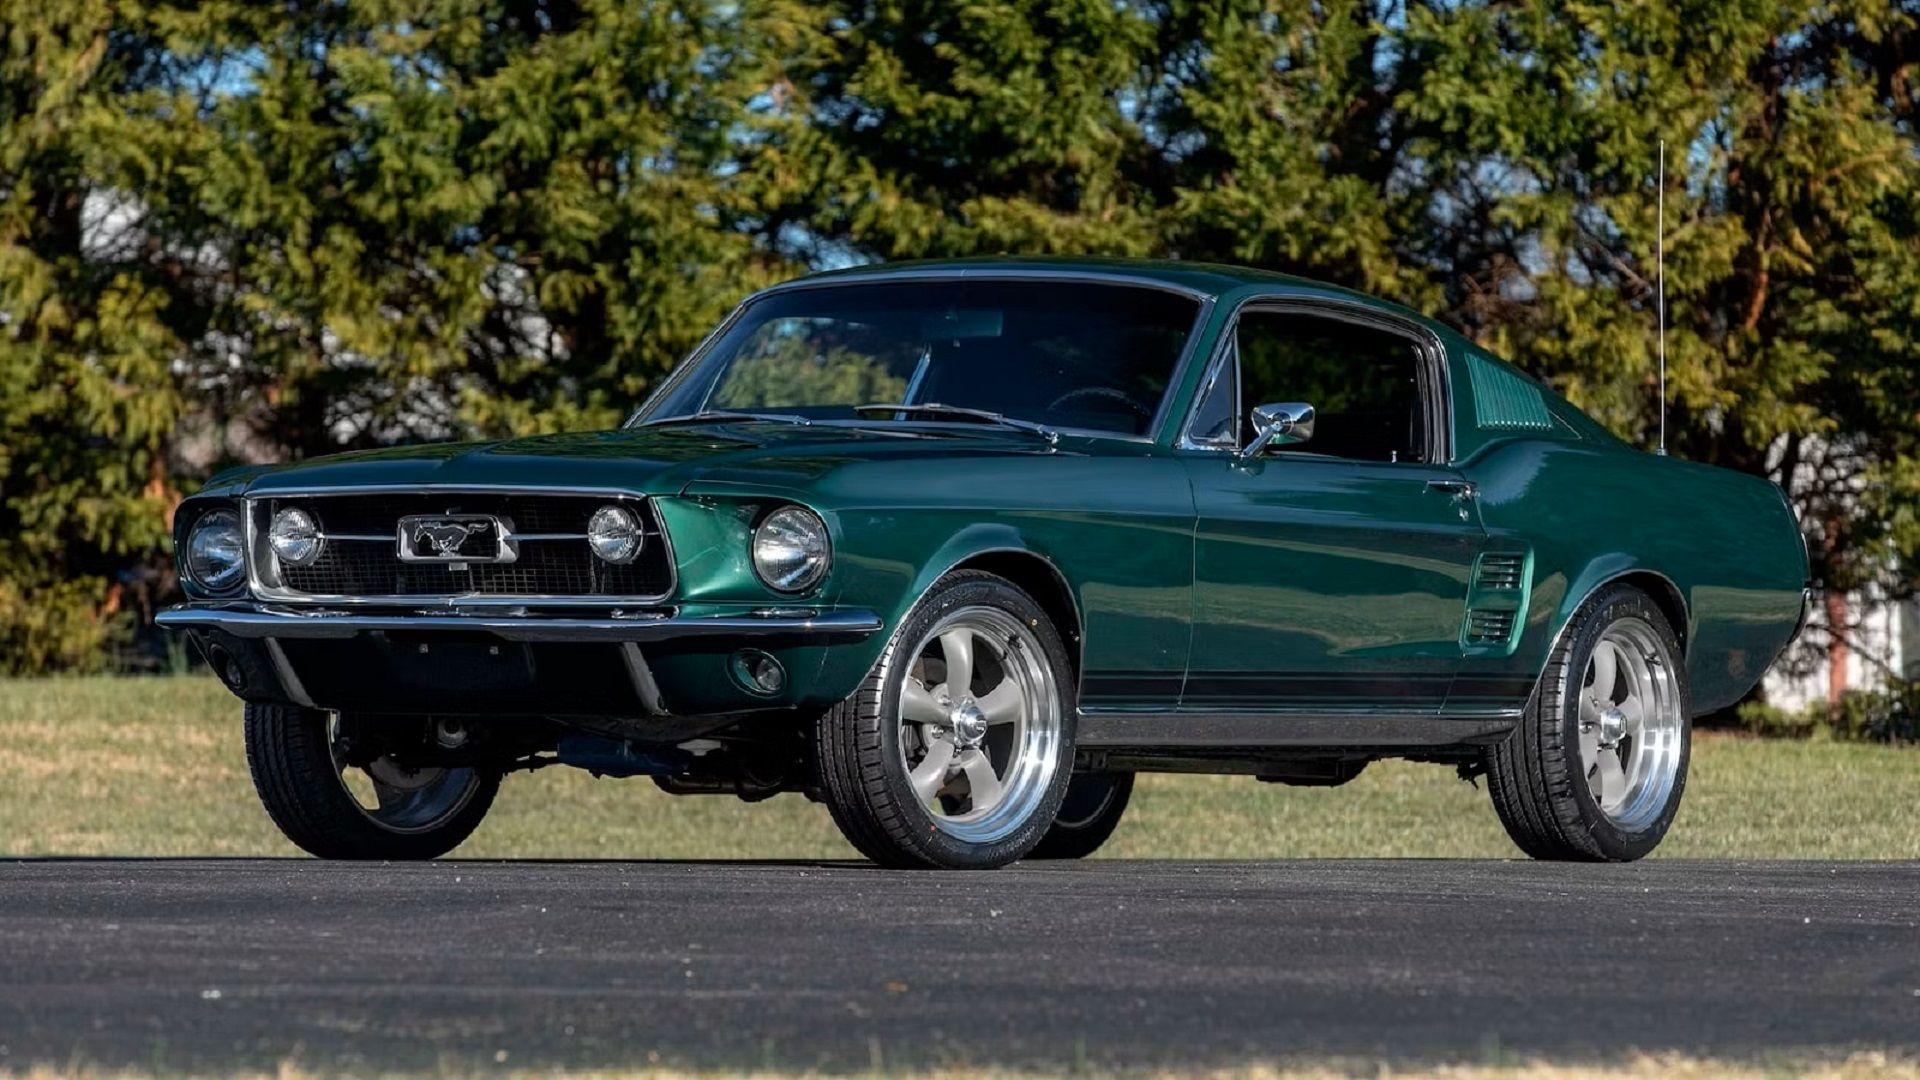 A parked 1967 Ford Mustang Fastback GT 